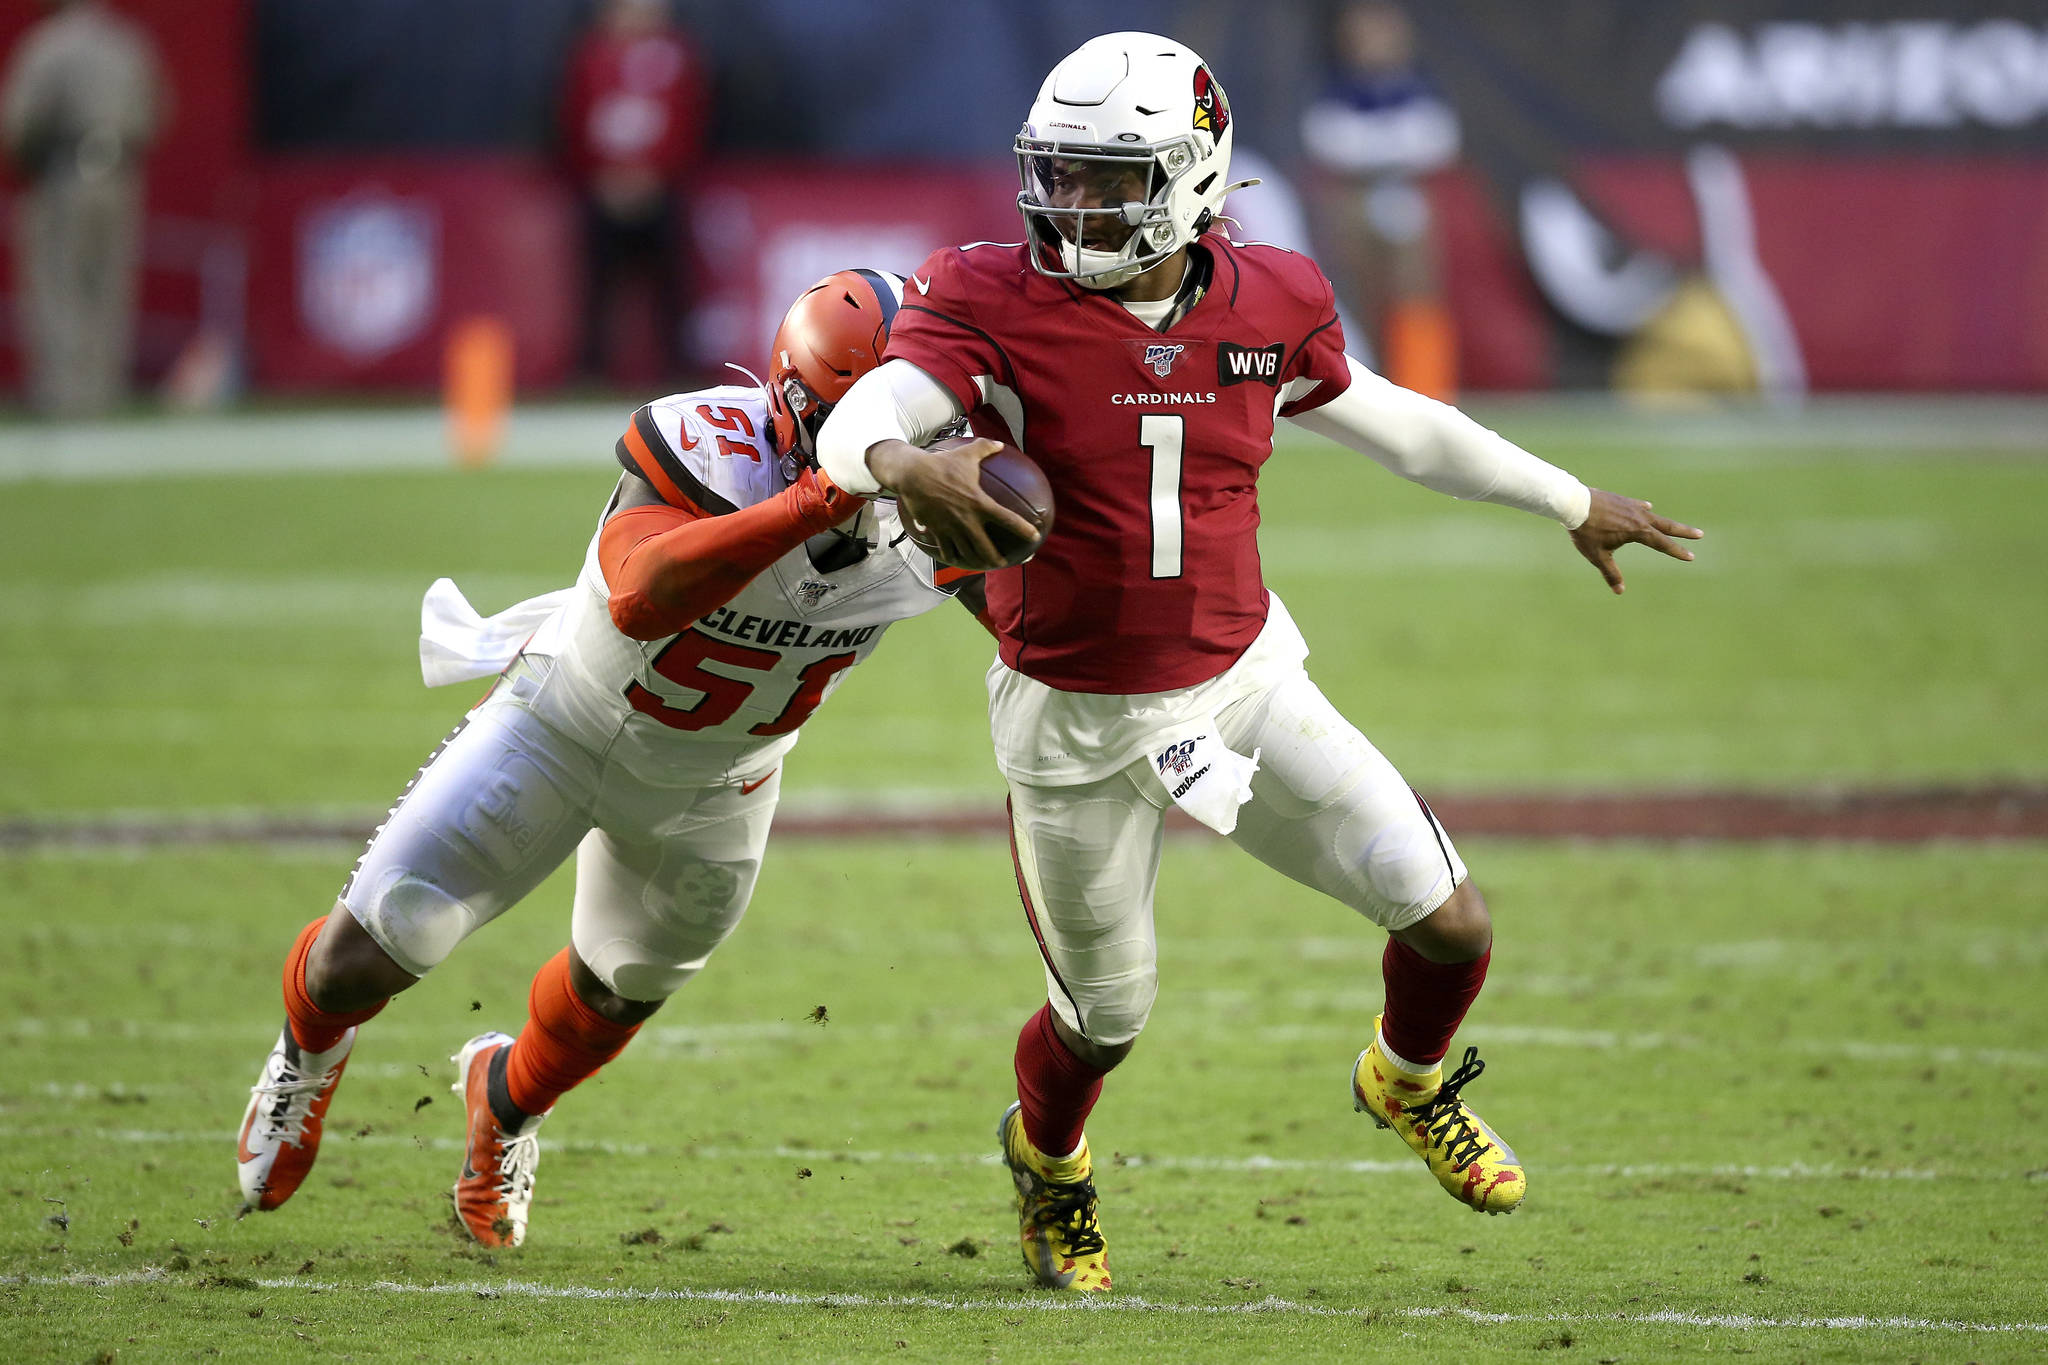 FILE - In this Dec. 15, 2019, file photo, Arizona Cardinals quarterback Kyler Murray (1) gets away from Cleveland Browns linebacker Mack Wilson (51) during the second half of an NFL football game in Glendale, Ariz. Coach Kliff Kingsbury and the Cardinals went 5-10-1 last year, but they’re a popular pick to improve sharply this year. (AP Photo/Ross D. Franklin, File)